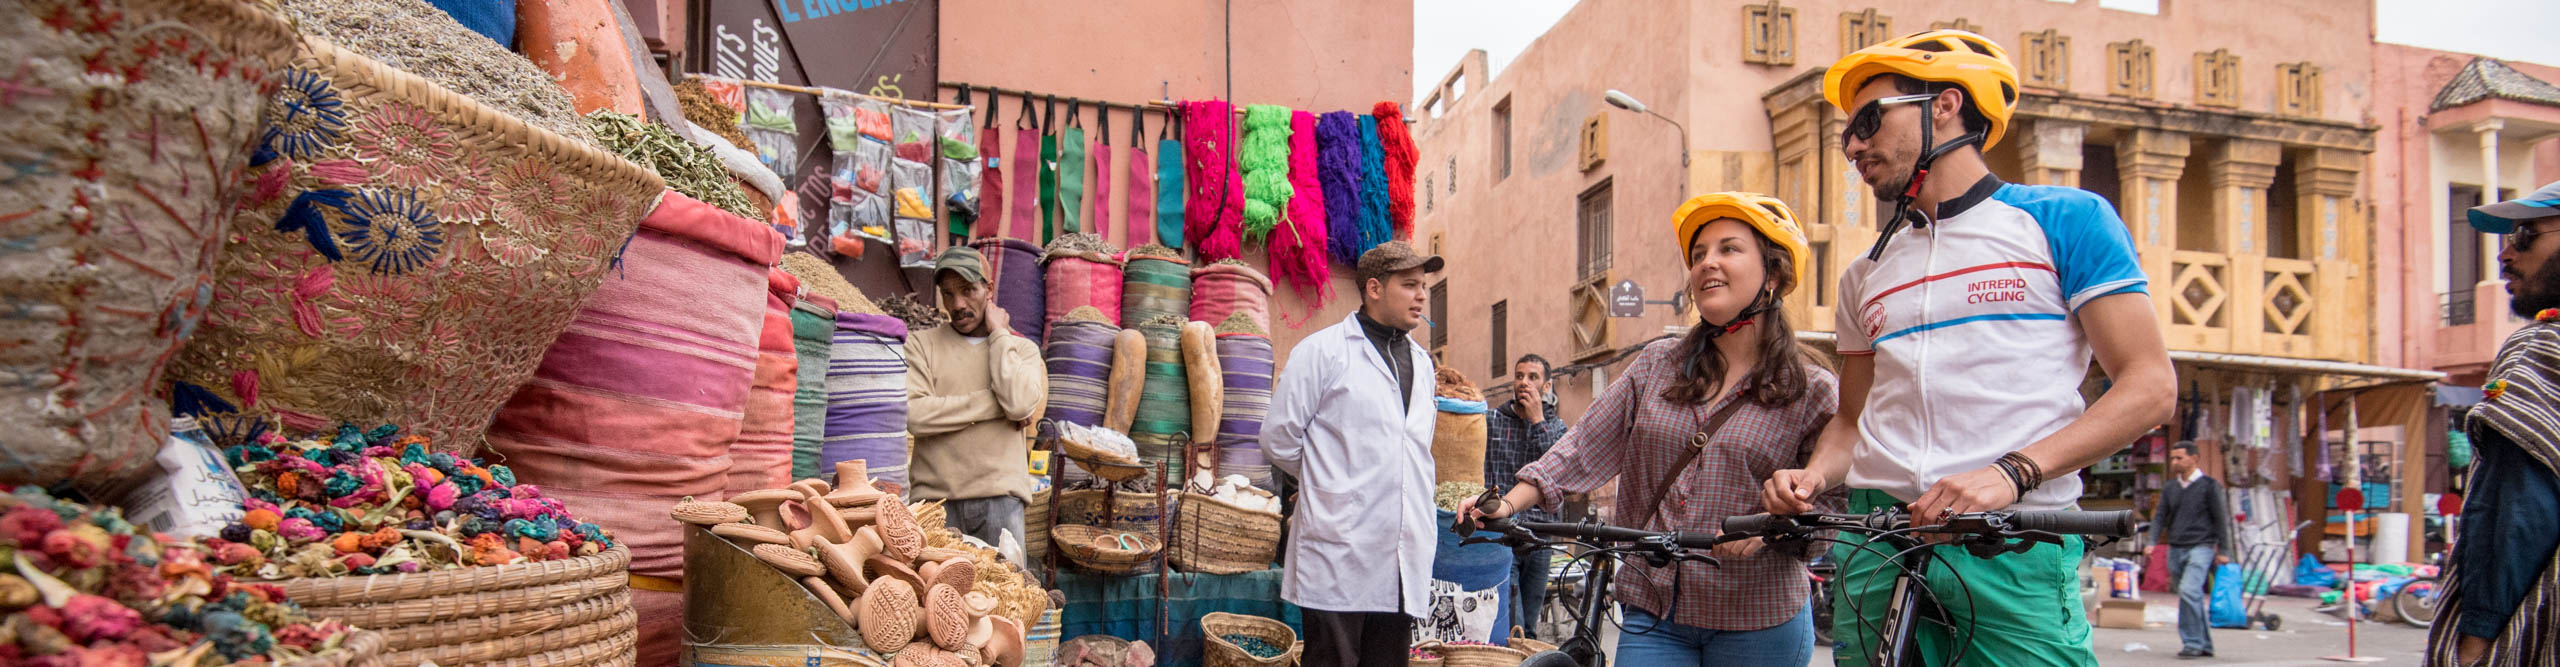 Cyclists at the markets with colourful goods in the stalls, in Marrakech, Morocco